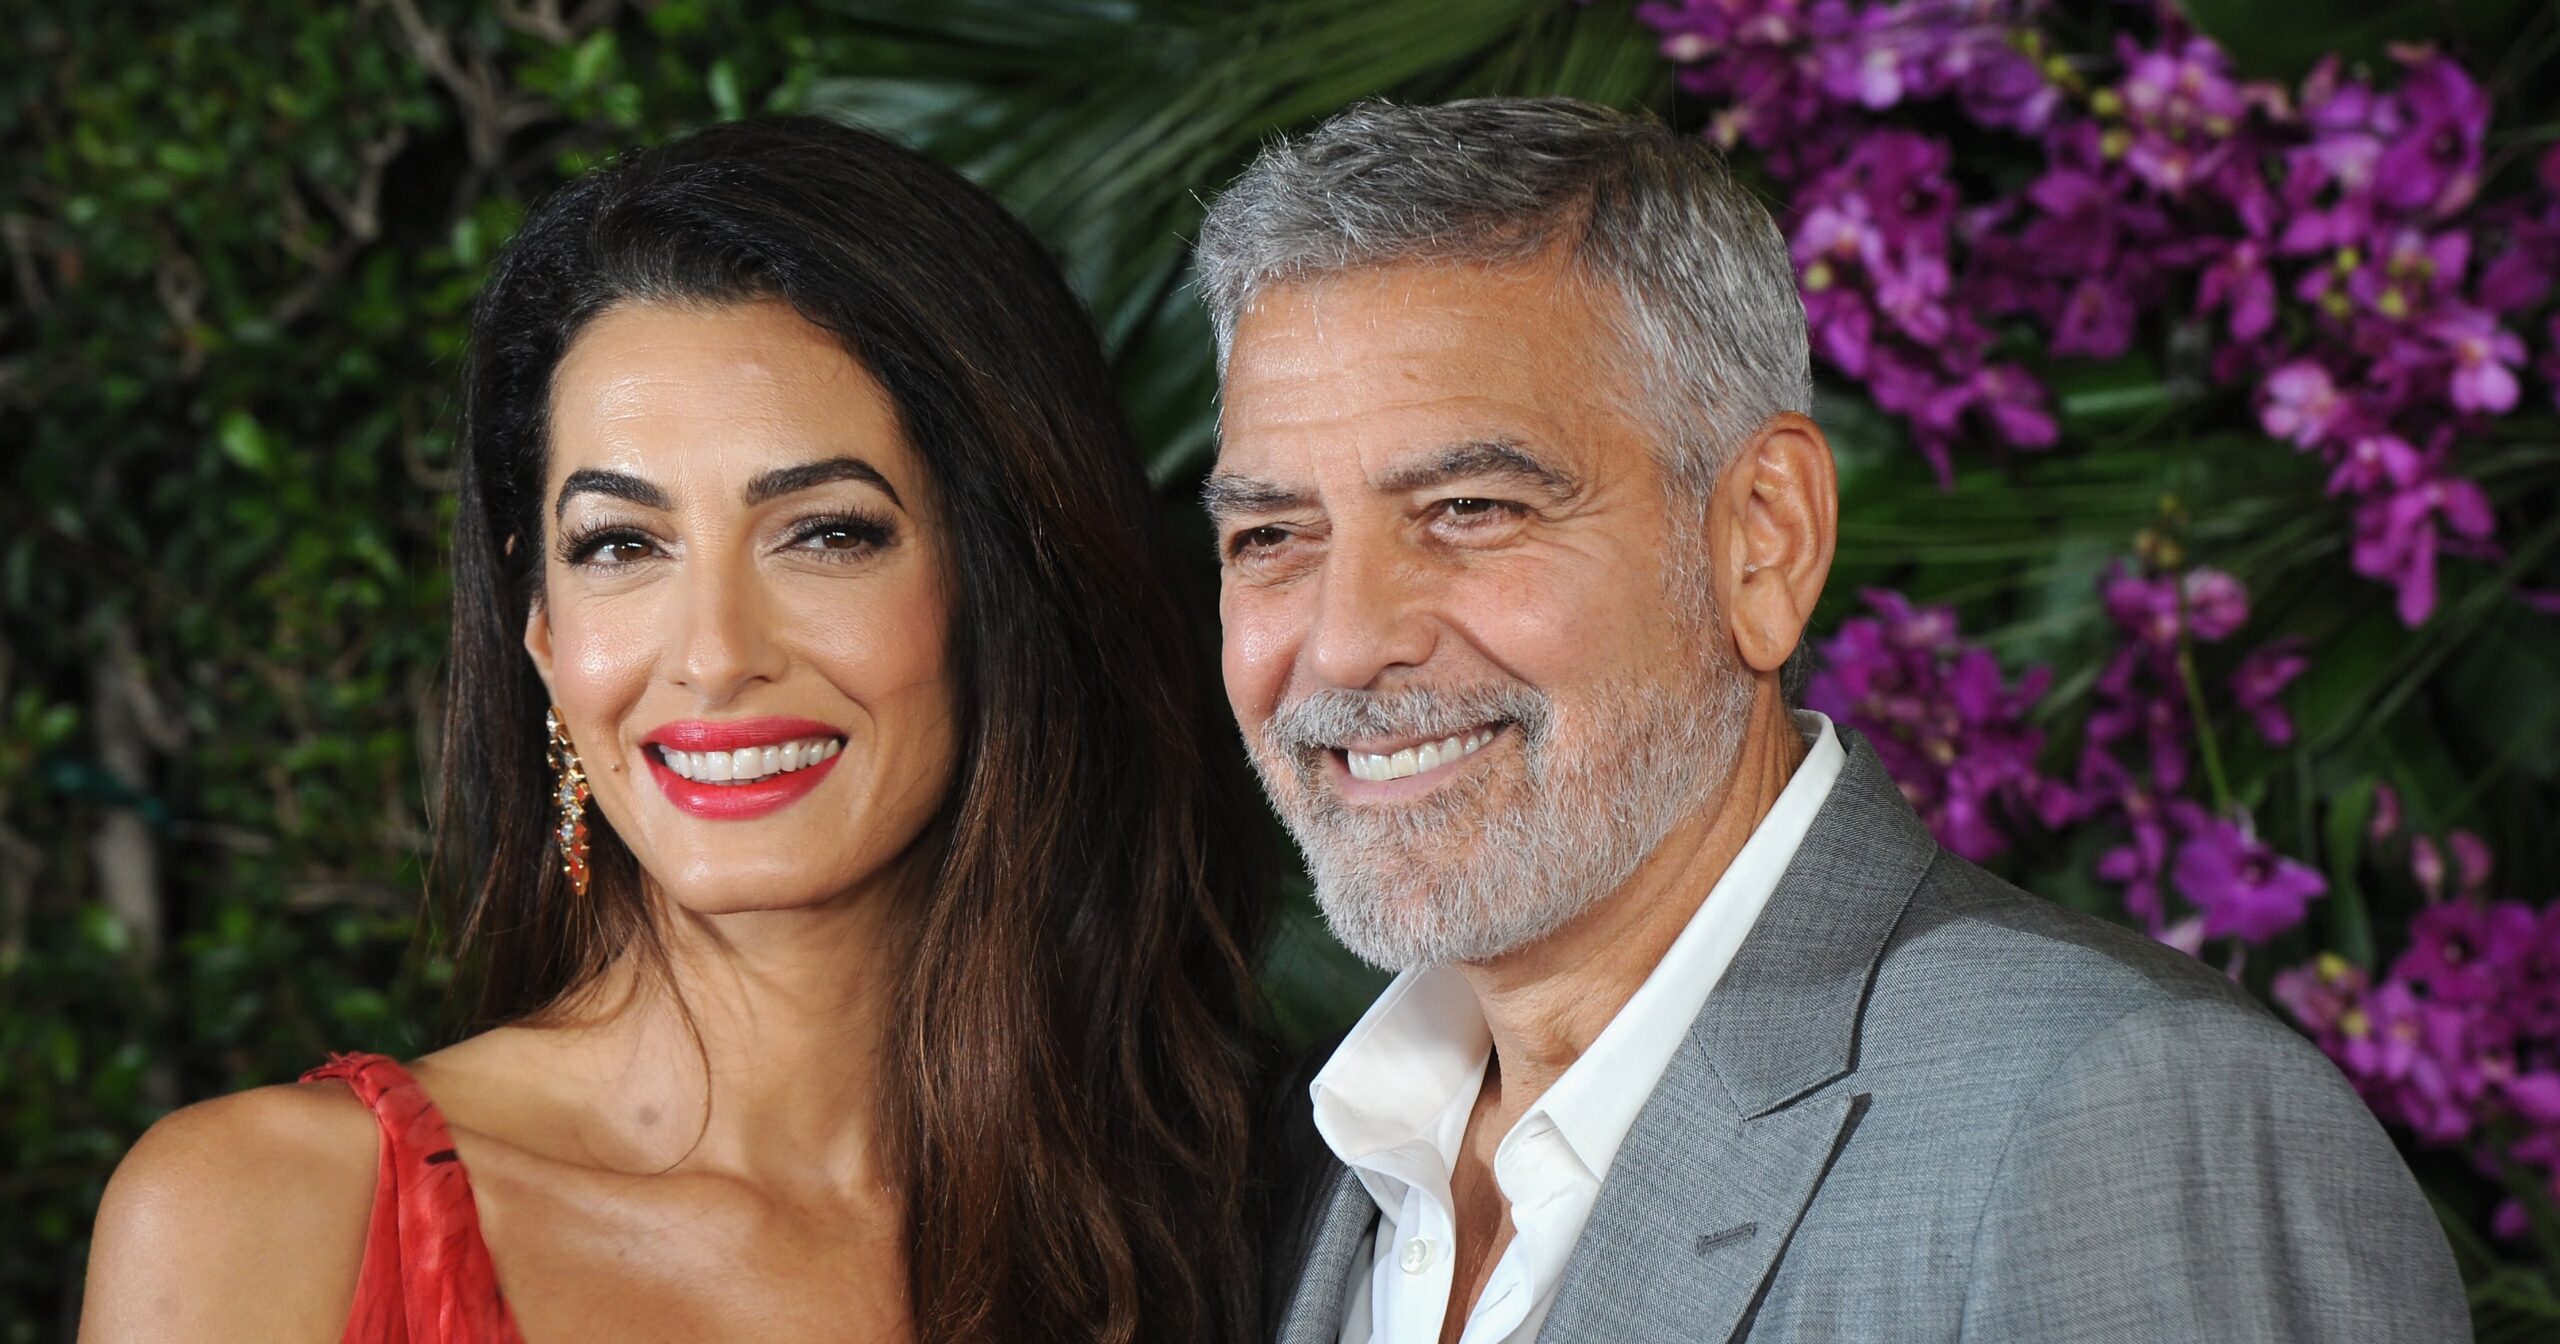 George and Amal Clooney’s Youngsters, Alexander and Ella